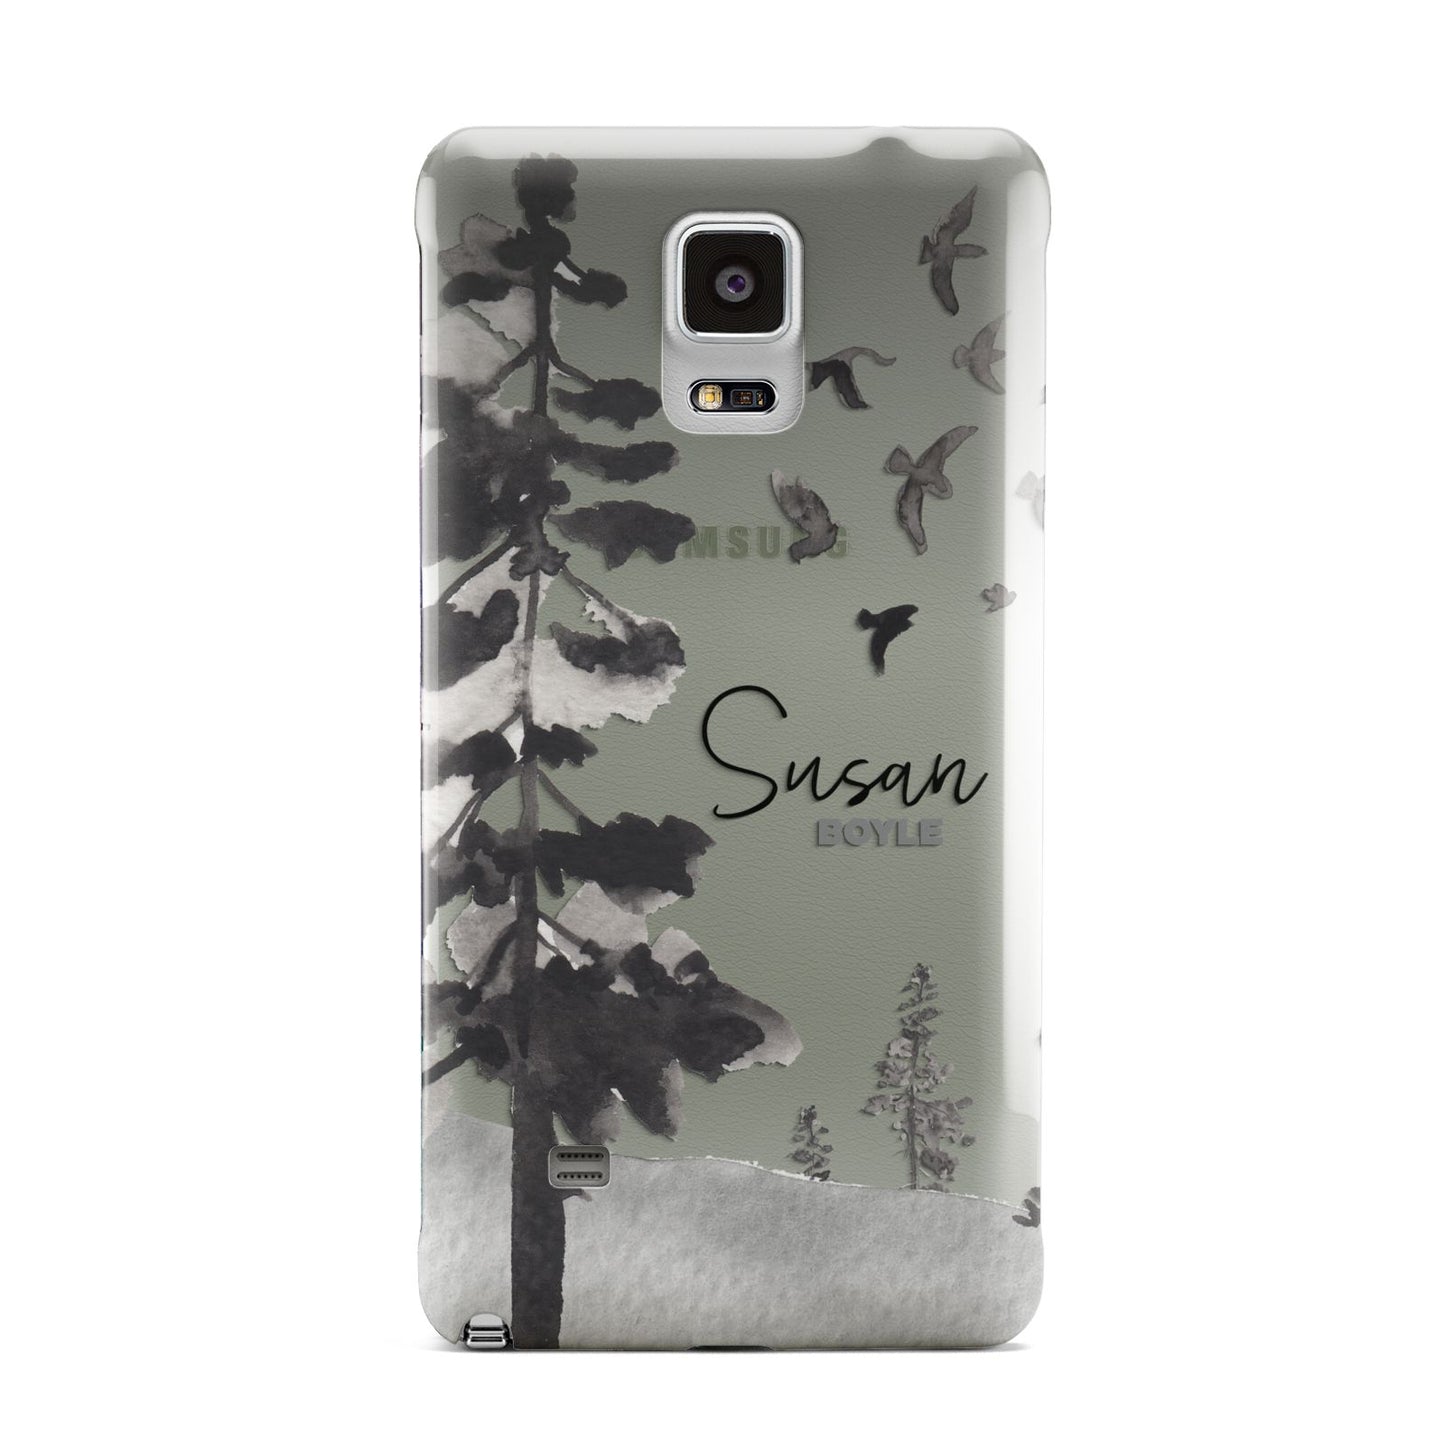 Personalised Monochrome Forest Samsung Galaxy Note 4 Case